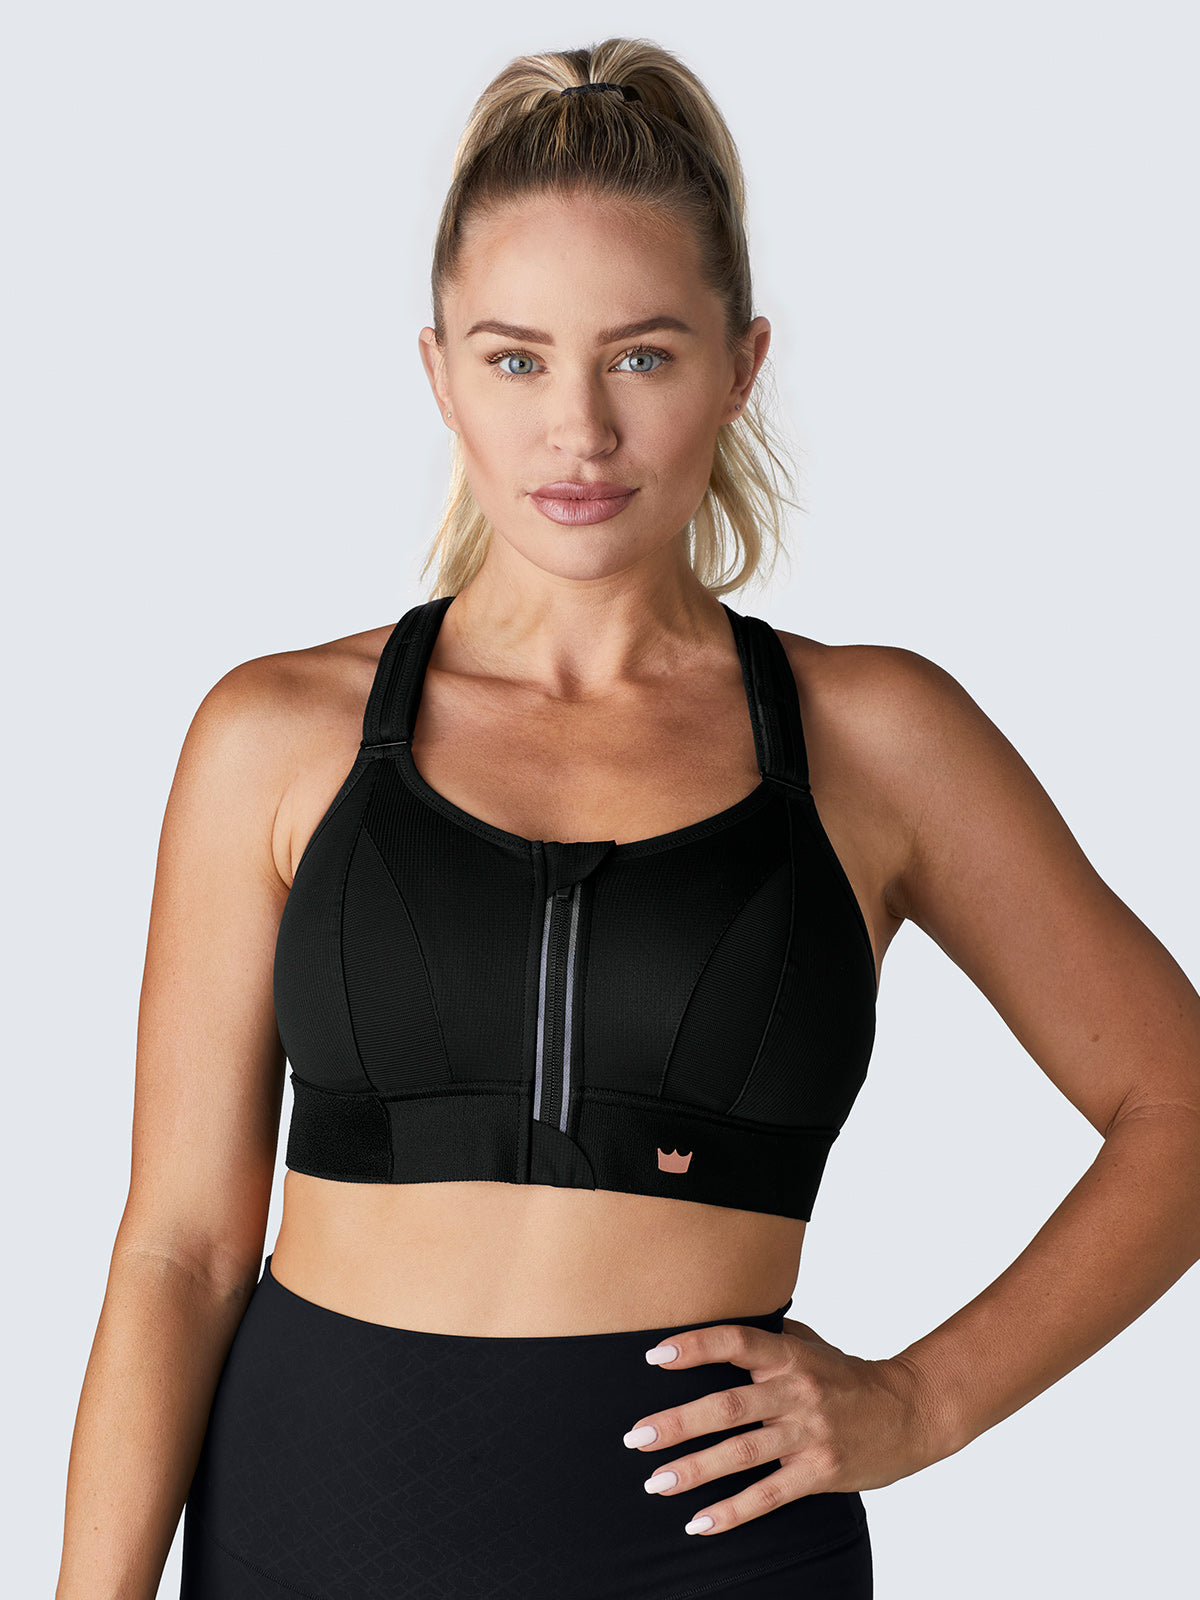 High-Intensity Shockproof Front Zipper Integrated Cup Sports Bra for  Running, Fitness, and Yoga